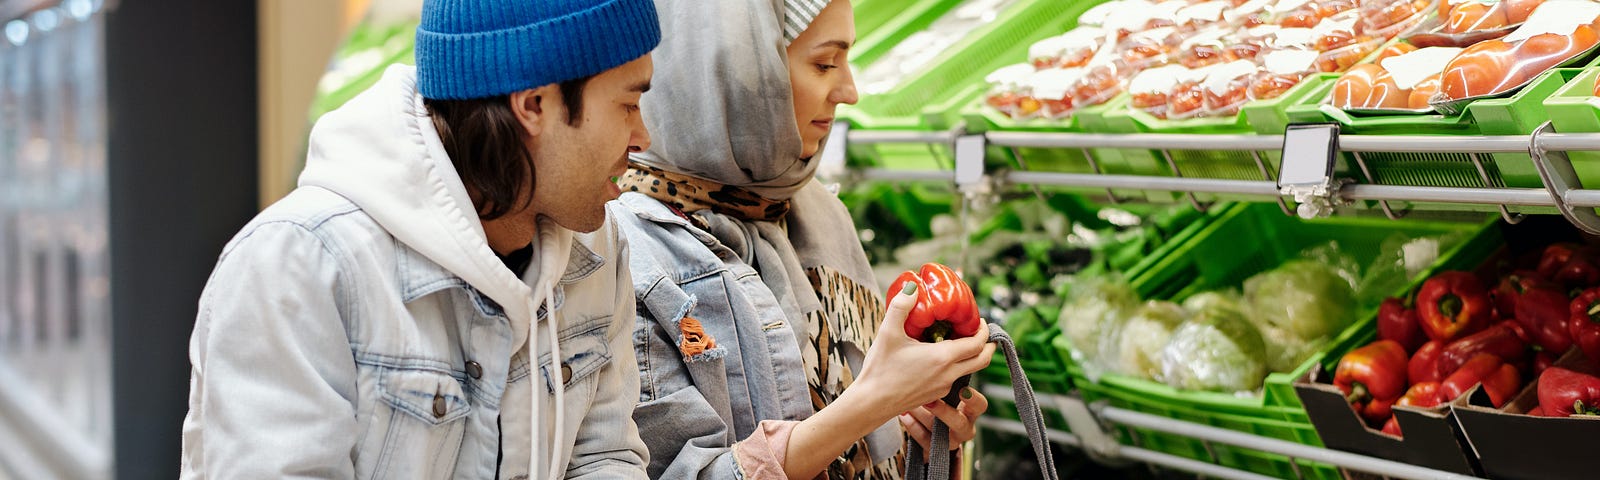 Man and a woman shopping in a grocery store looking at fresh vegetables